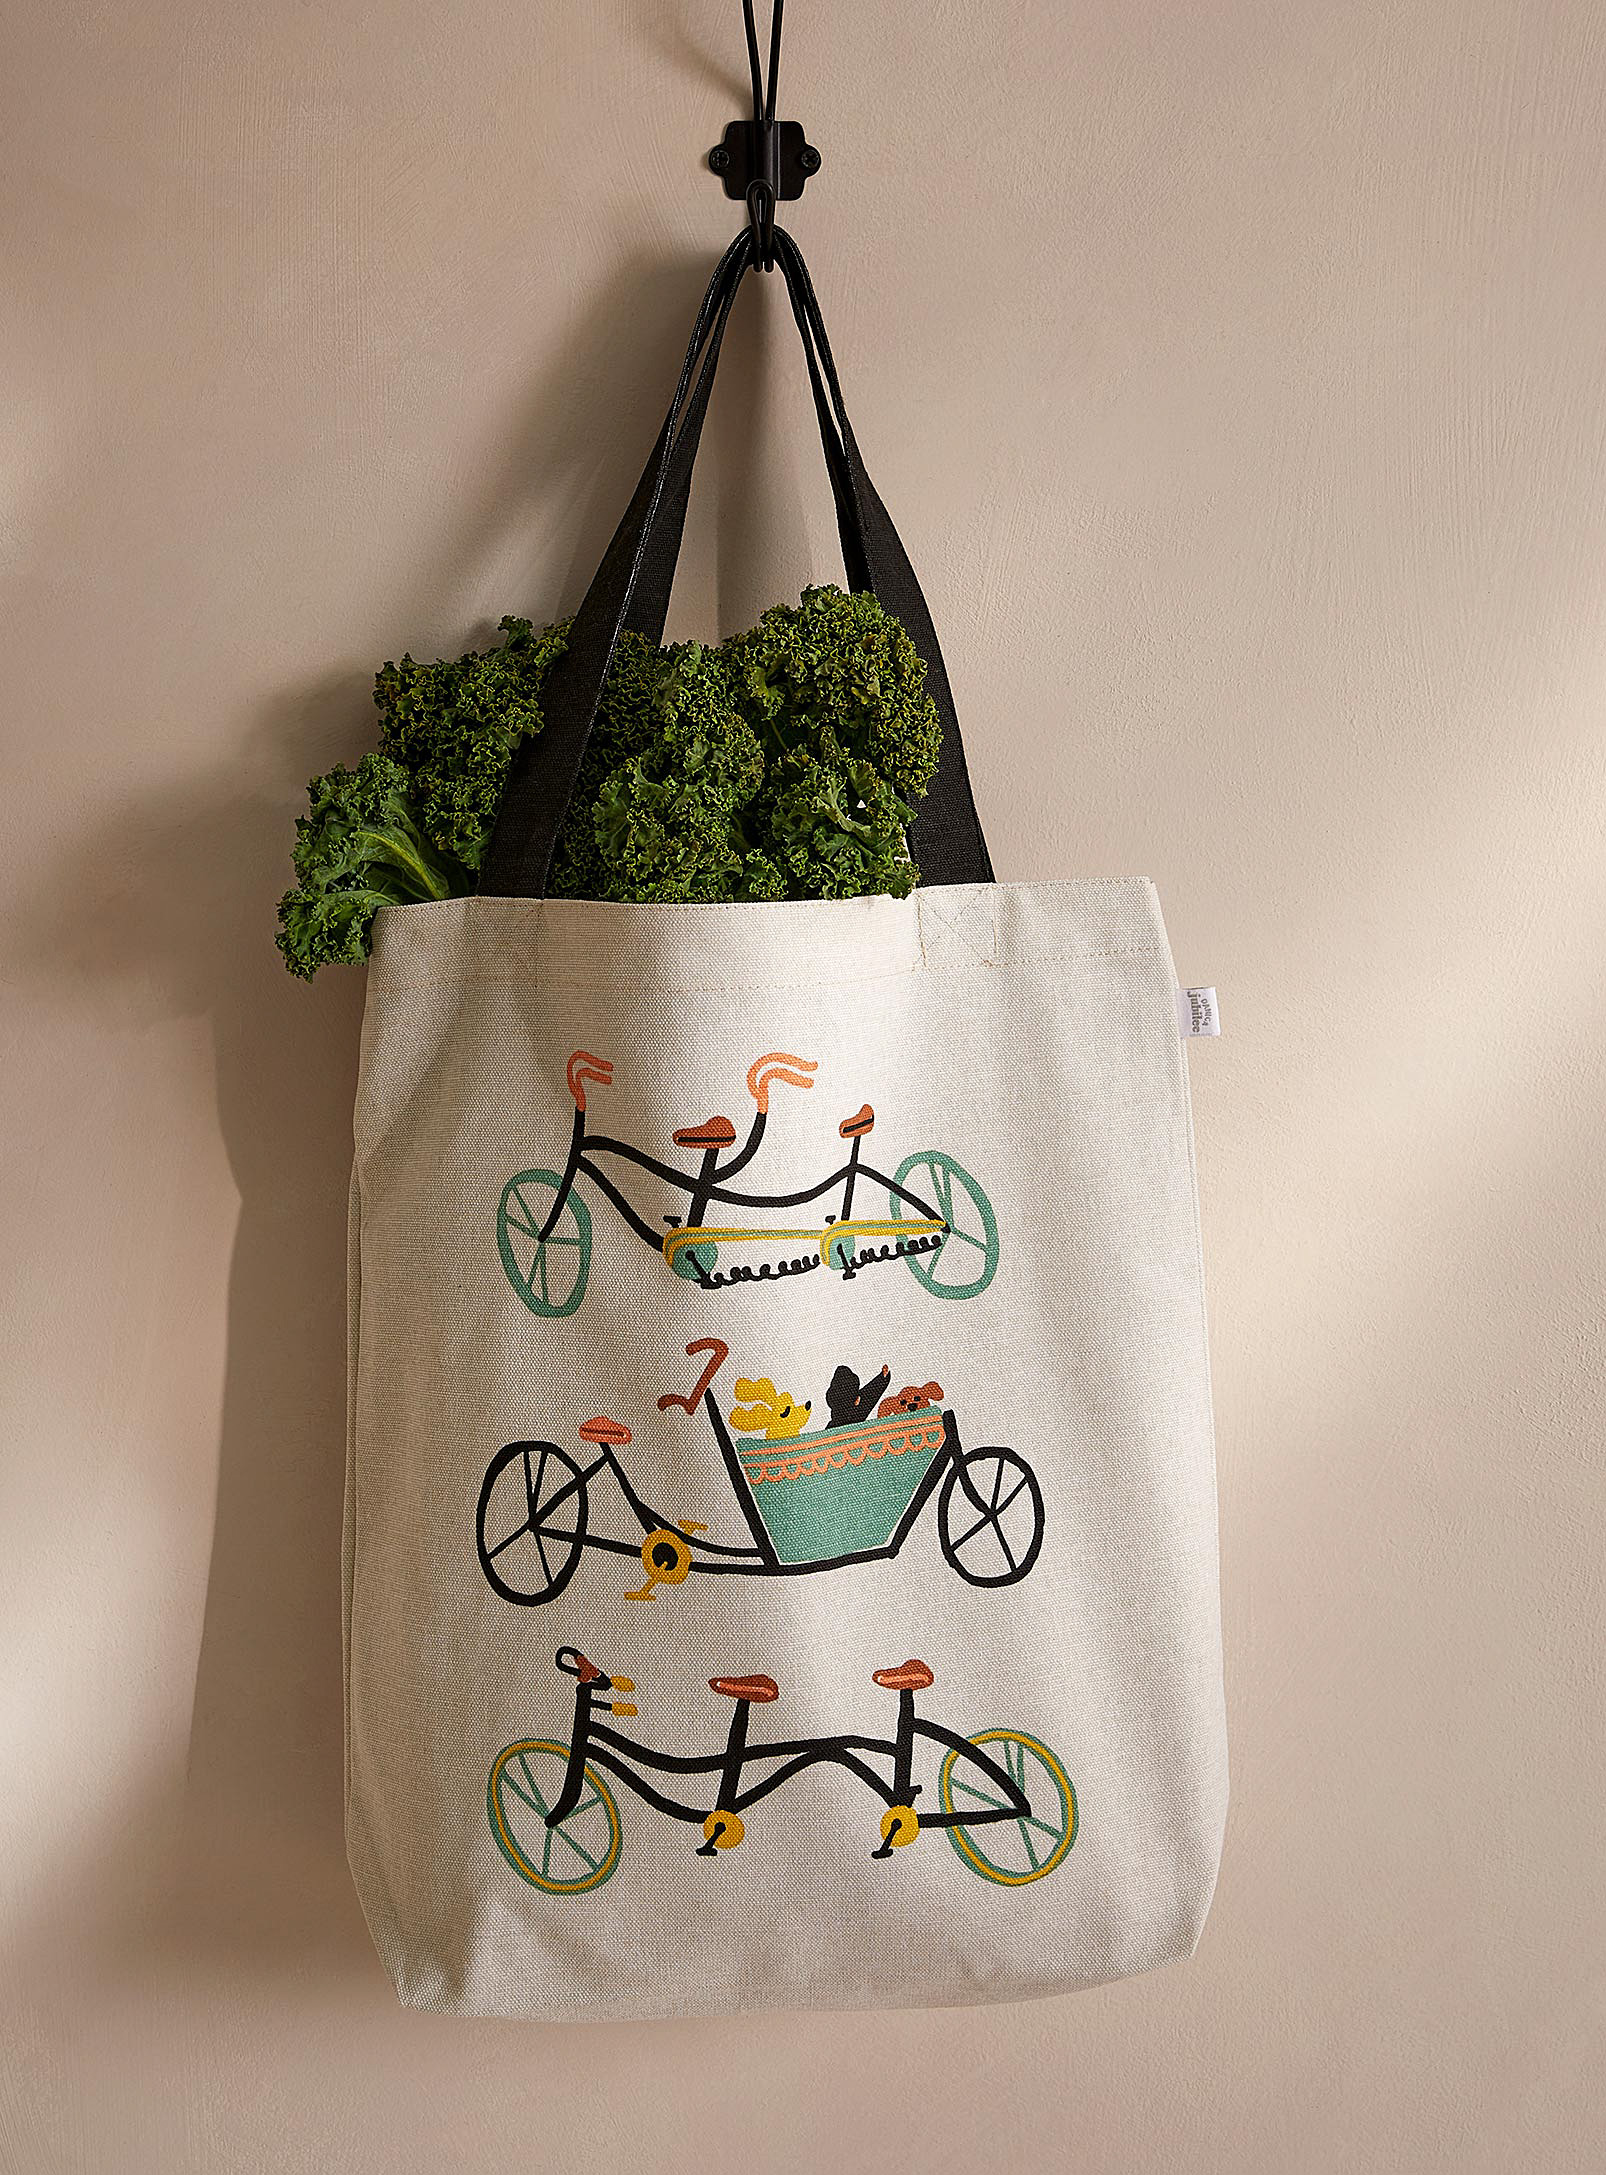 Simons Maison Tandem Bicycle Ride Reusable Bag In White